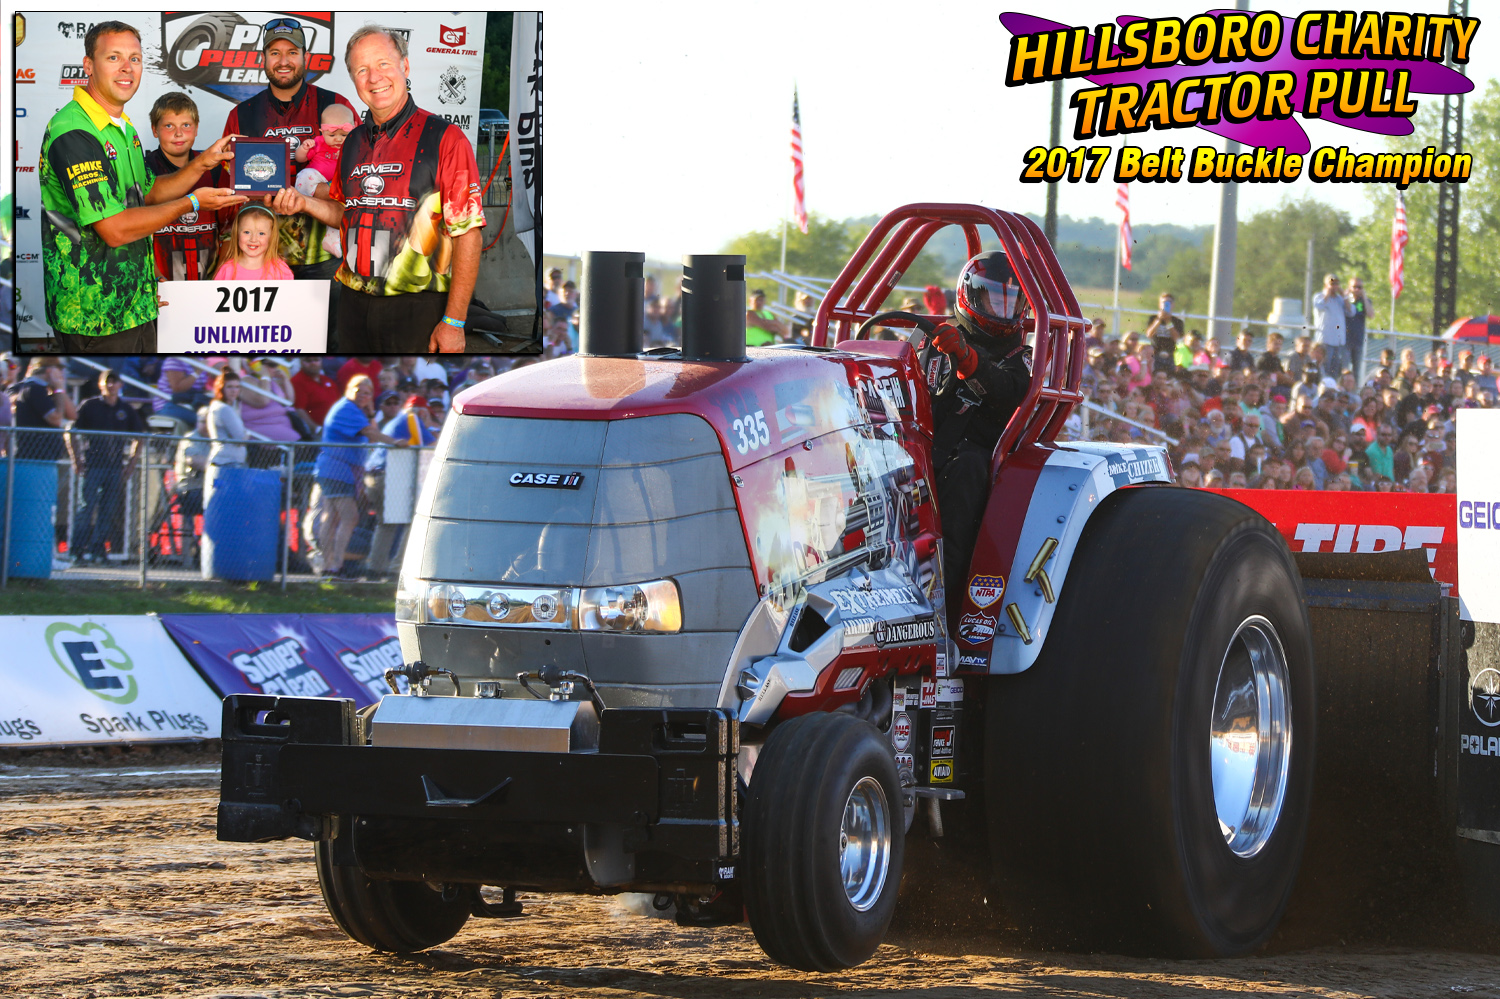 Unlimited Super Stock Tractors- Terry Blackbourn "Extremley Armed and Dangerous"
"